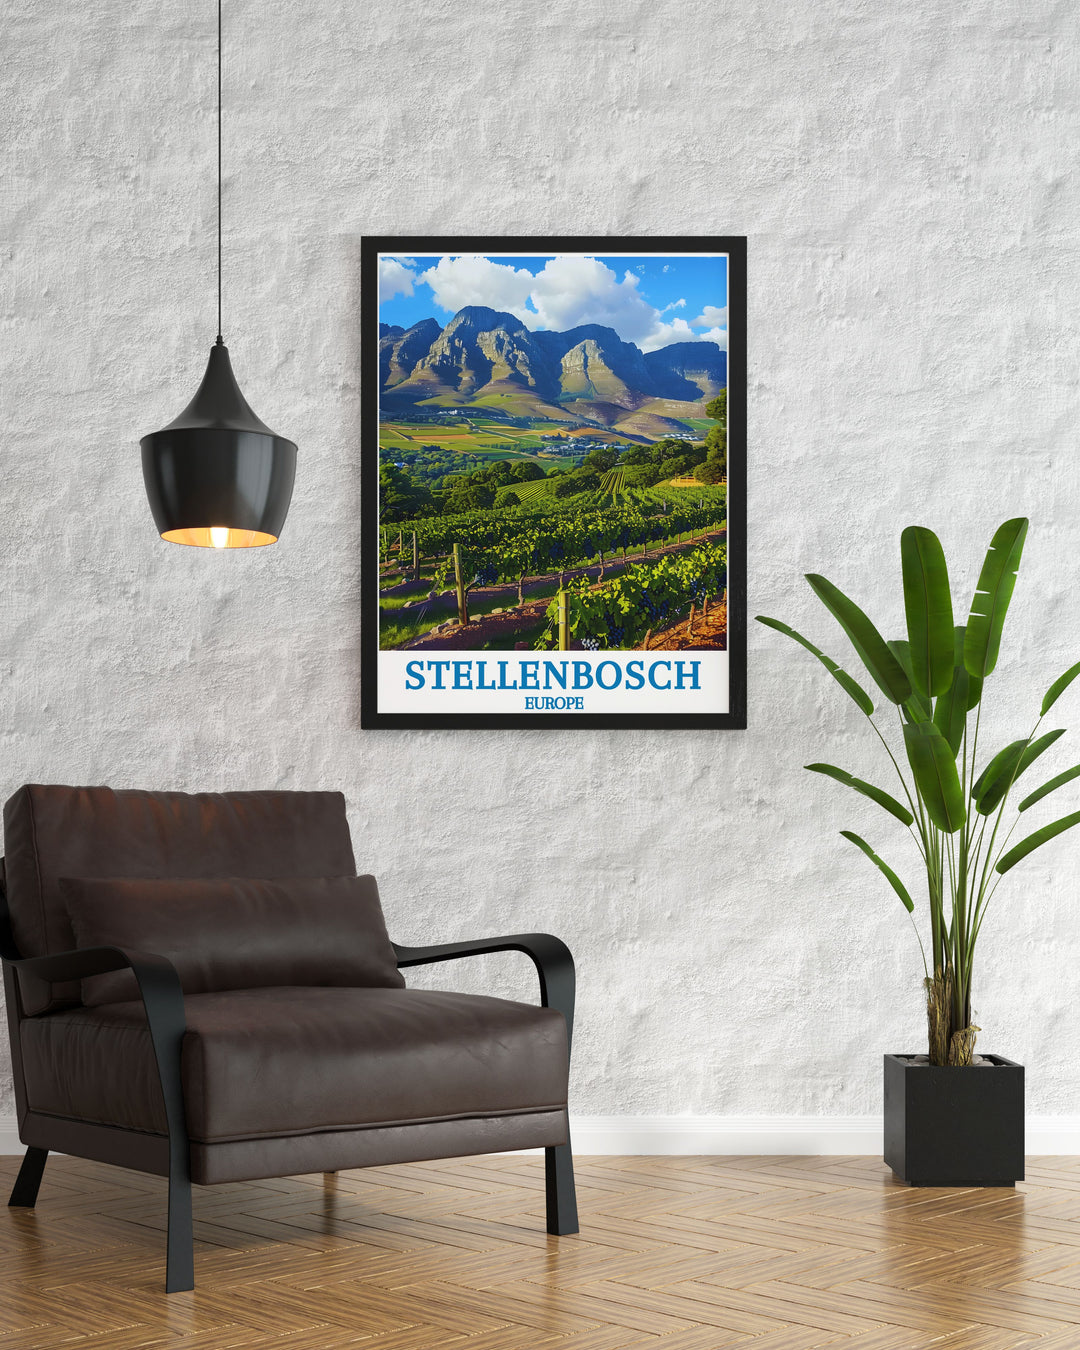 Immerse yourself in the winemaking heritage of Stellenbosch with this travel poster, highlighting the picturesque wine estates and scenic views.